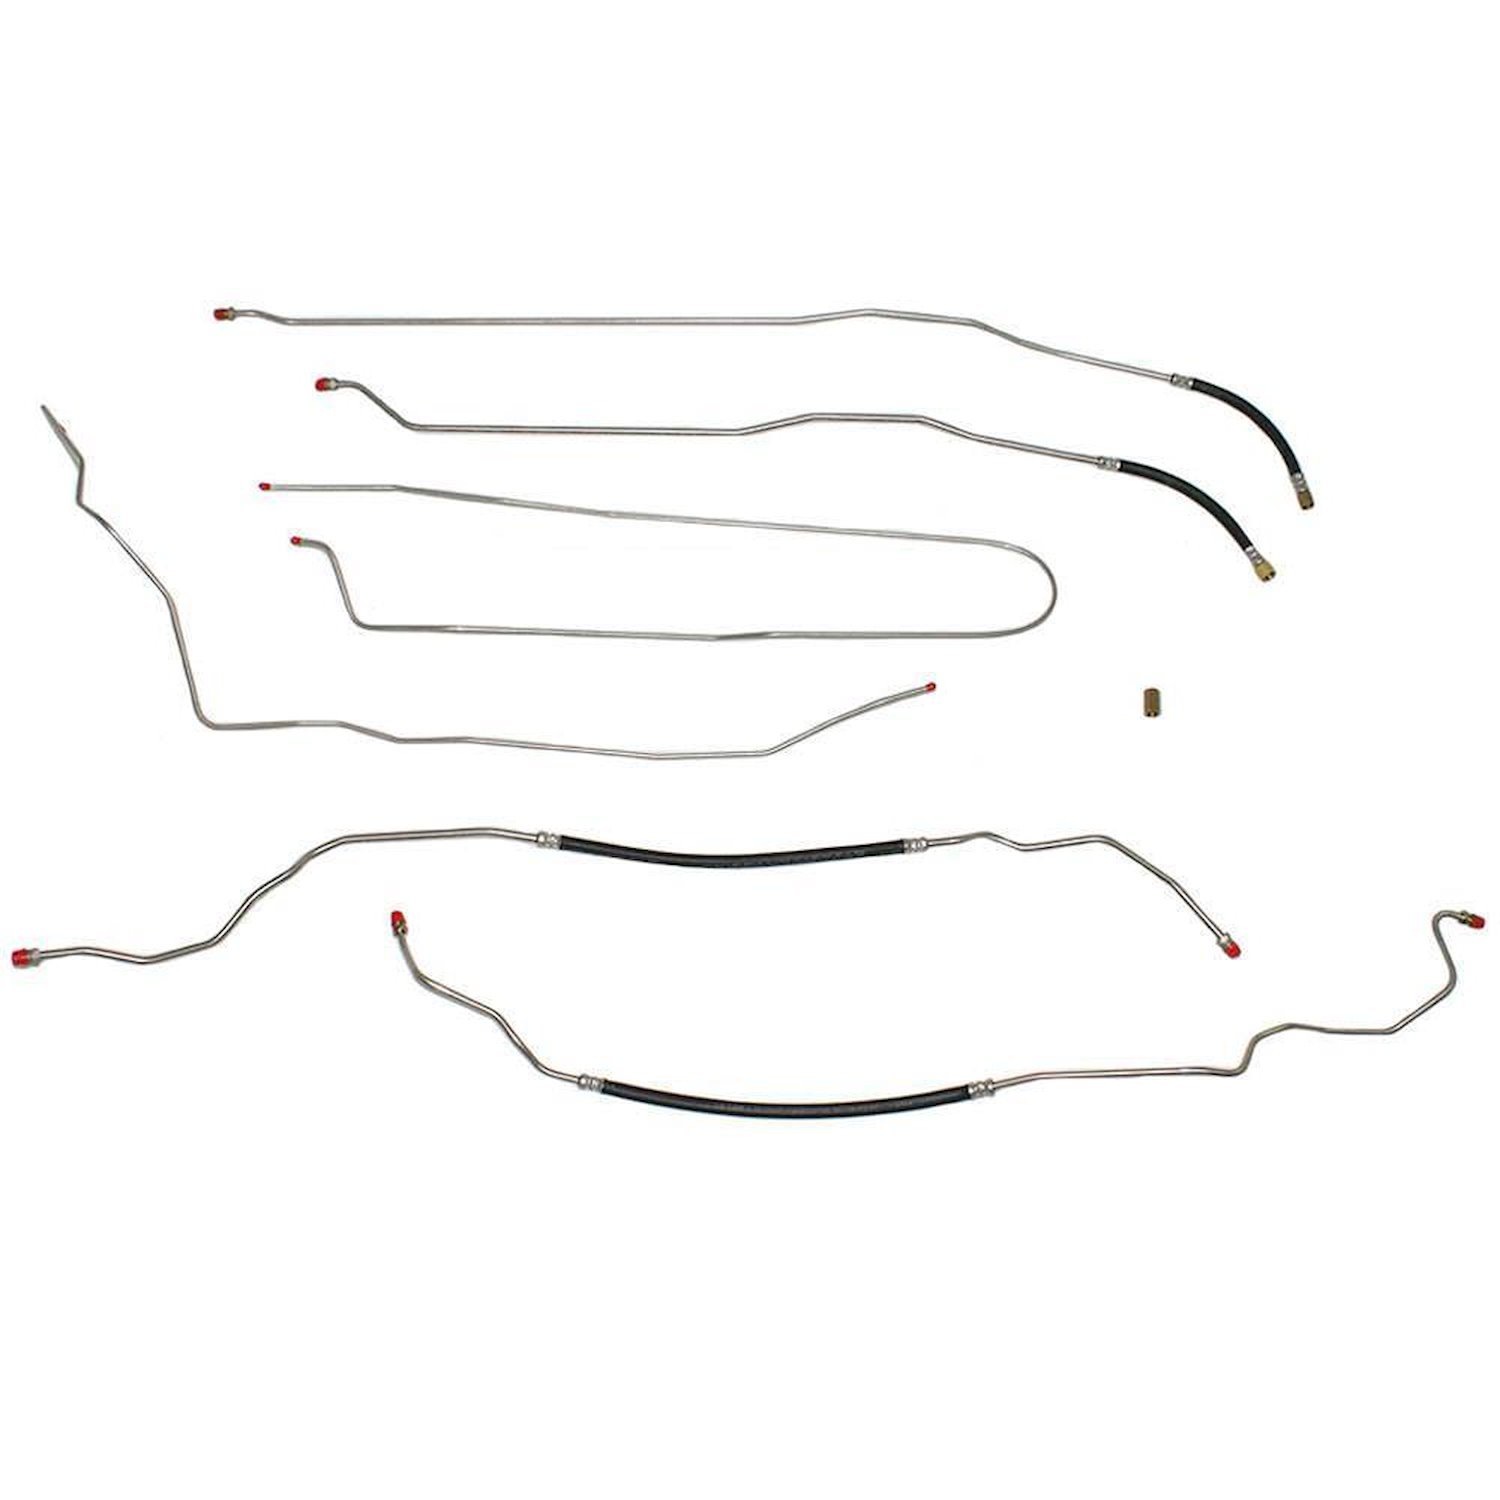 Complete Fuel Line Kit for 1998-2000 Chevy S10, GMC Sonoma [Stainless Steel]